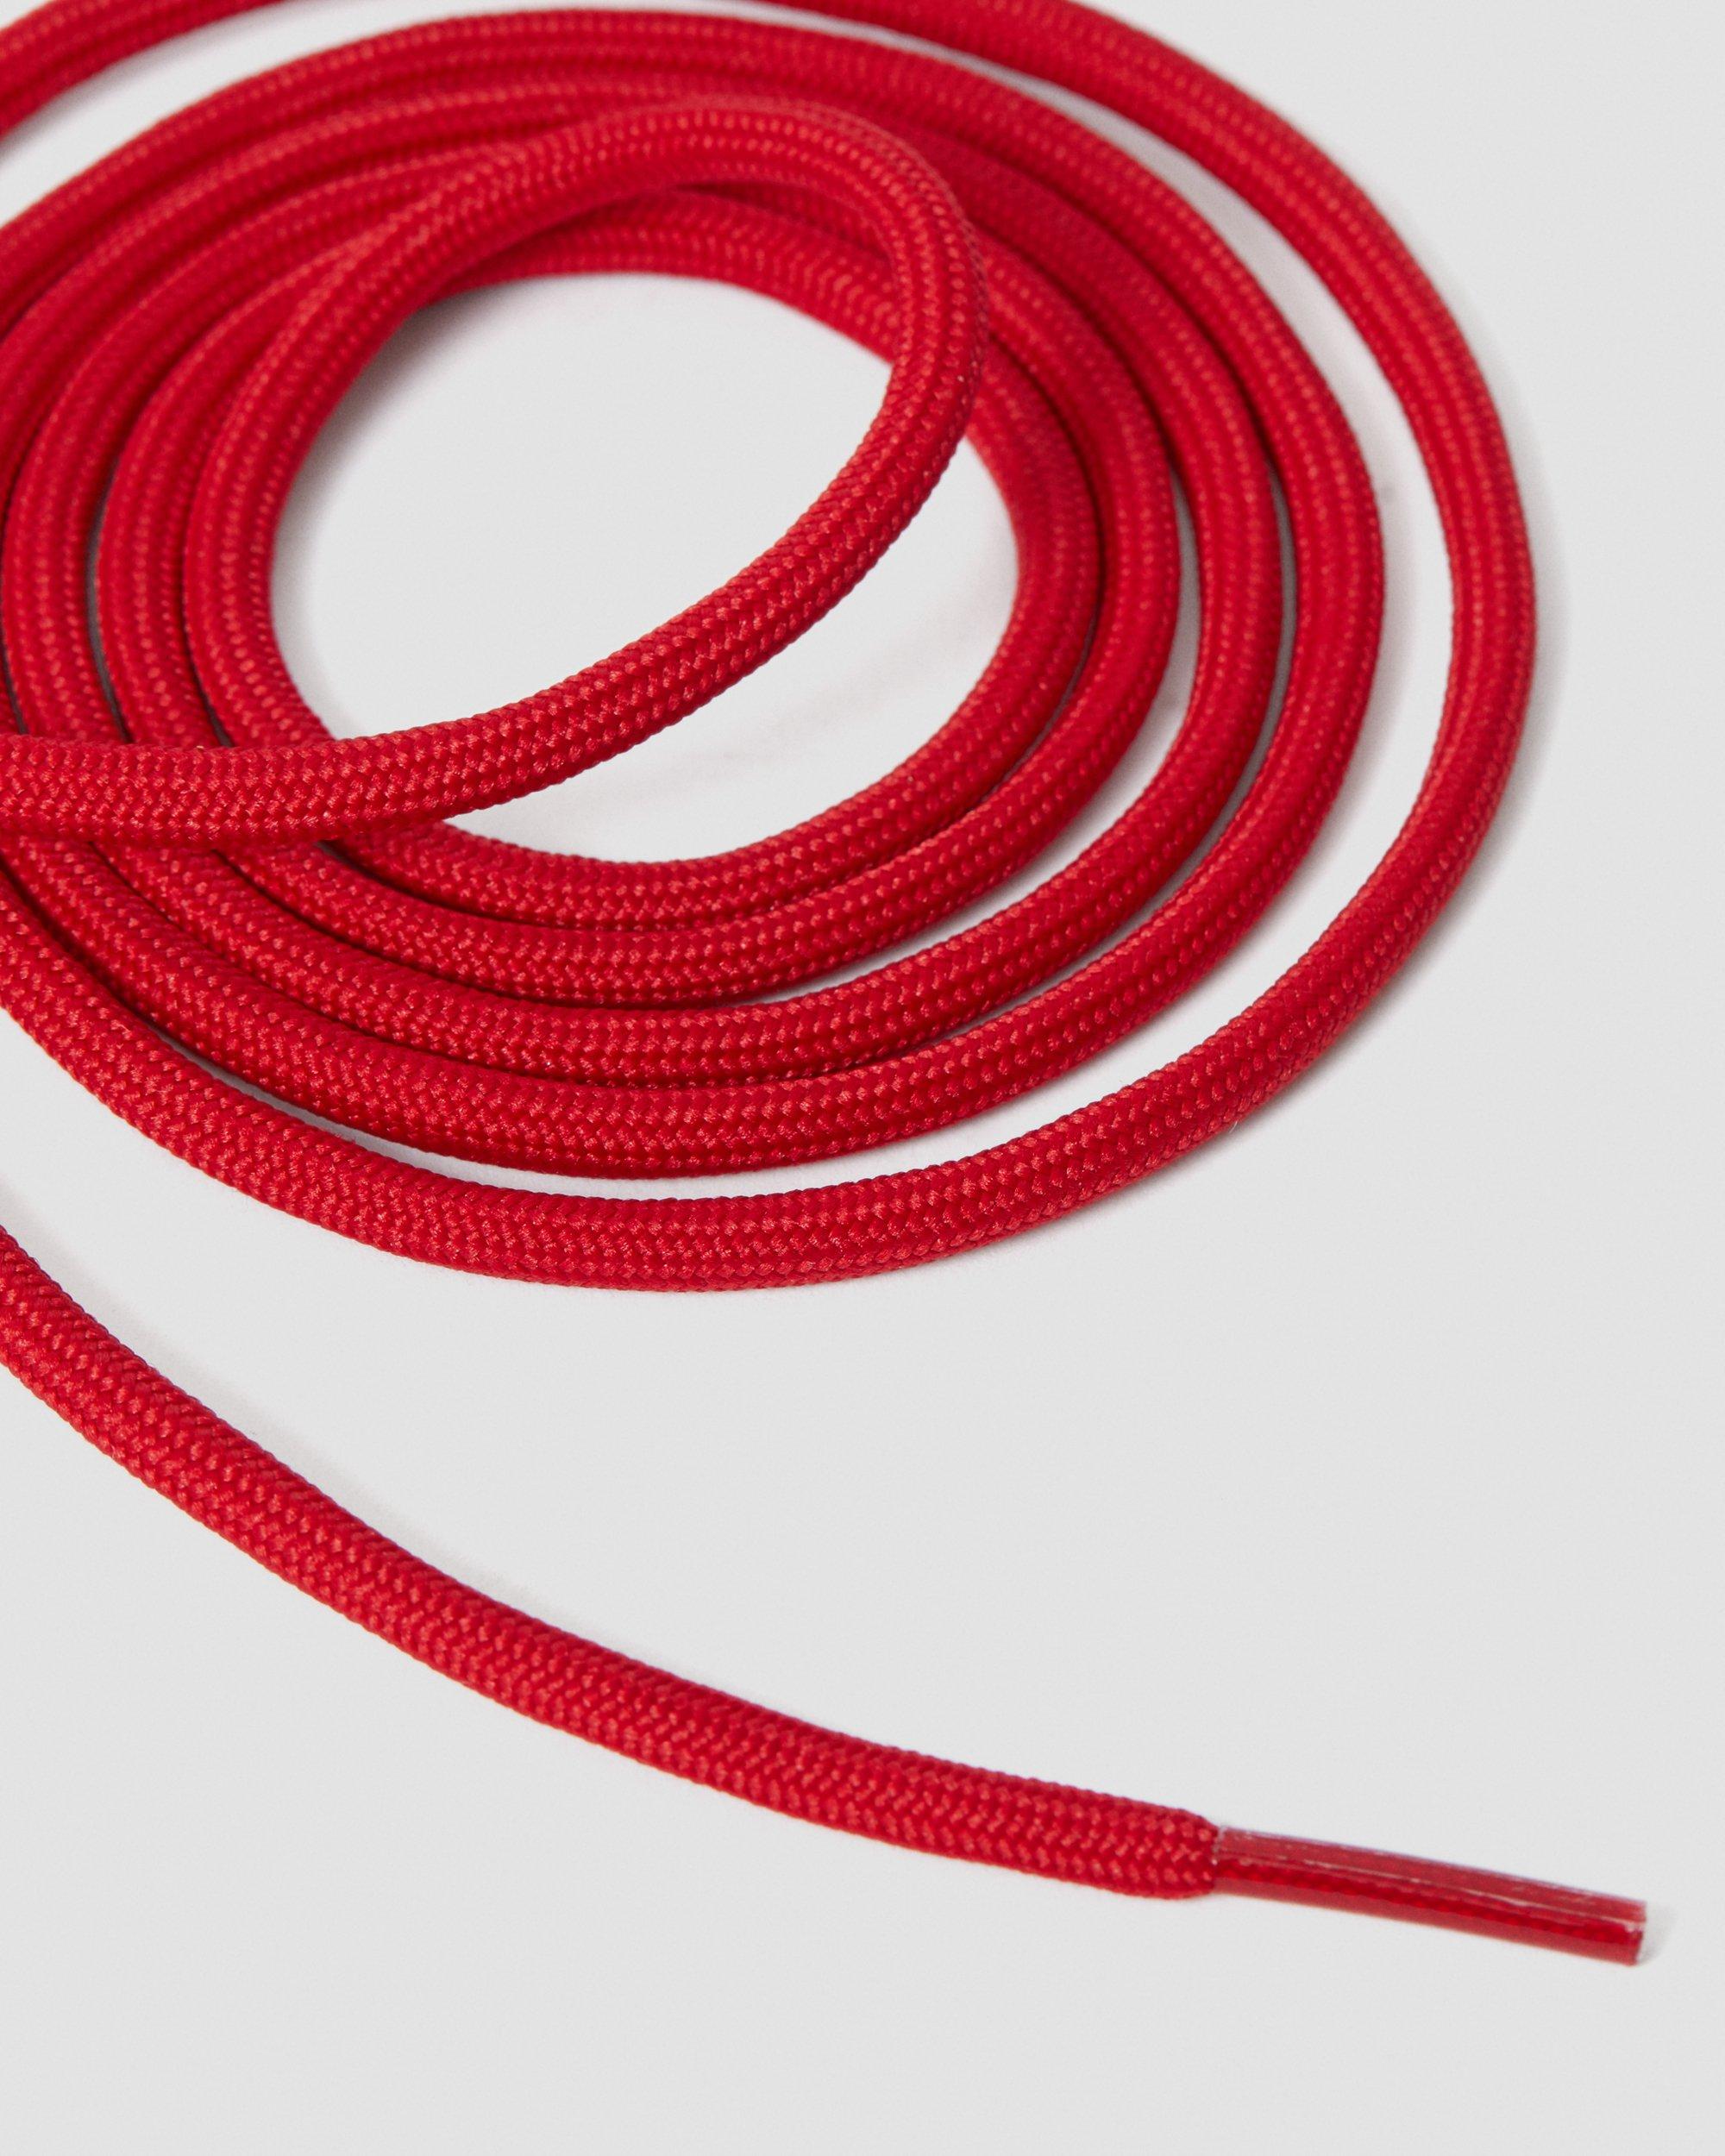 55 Inch Round Shoe Laces (8-10 Eye) in Red